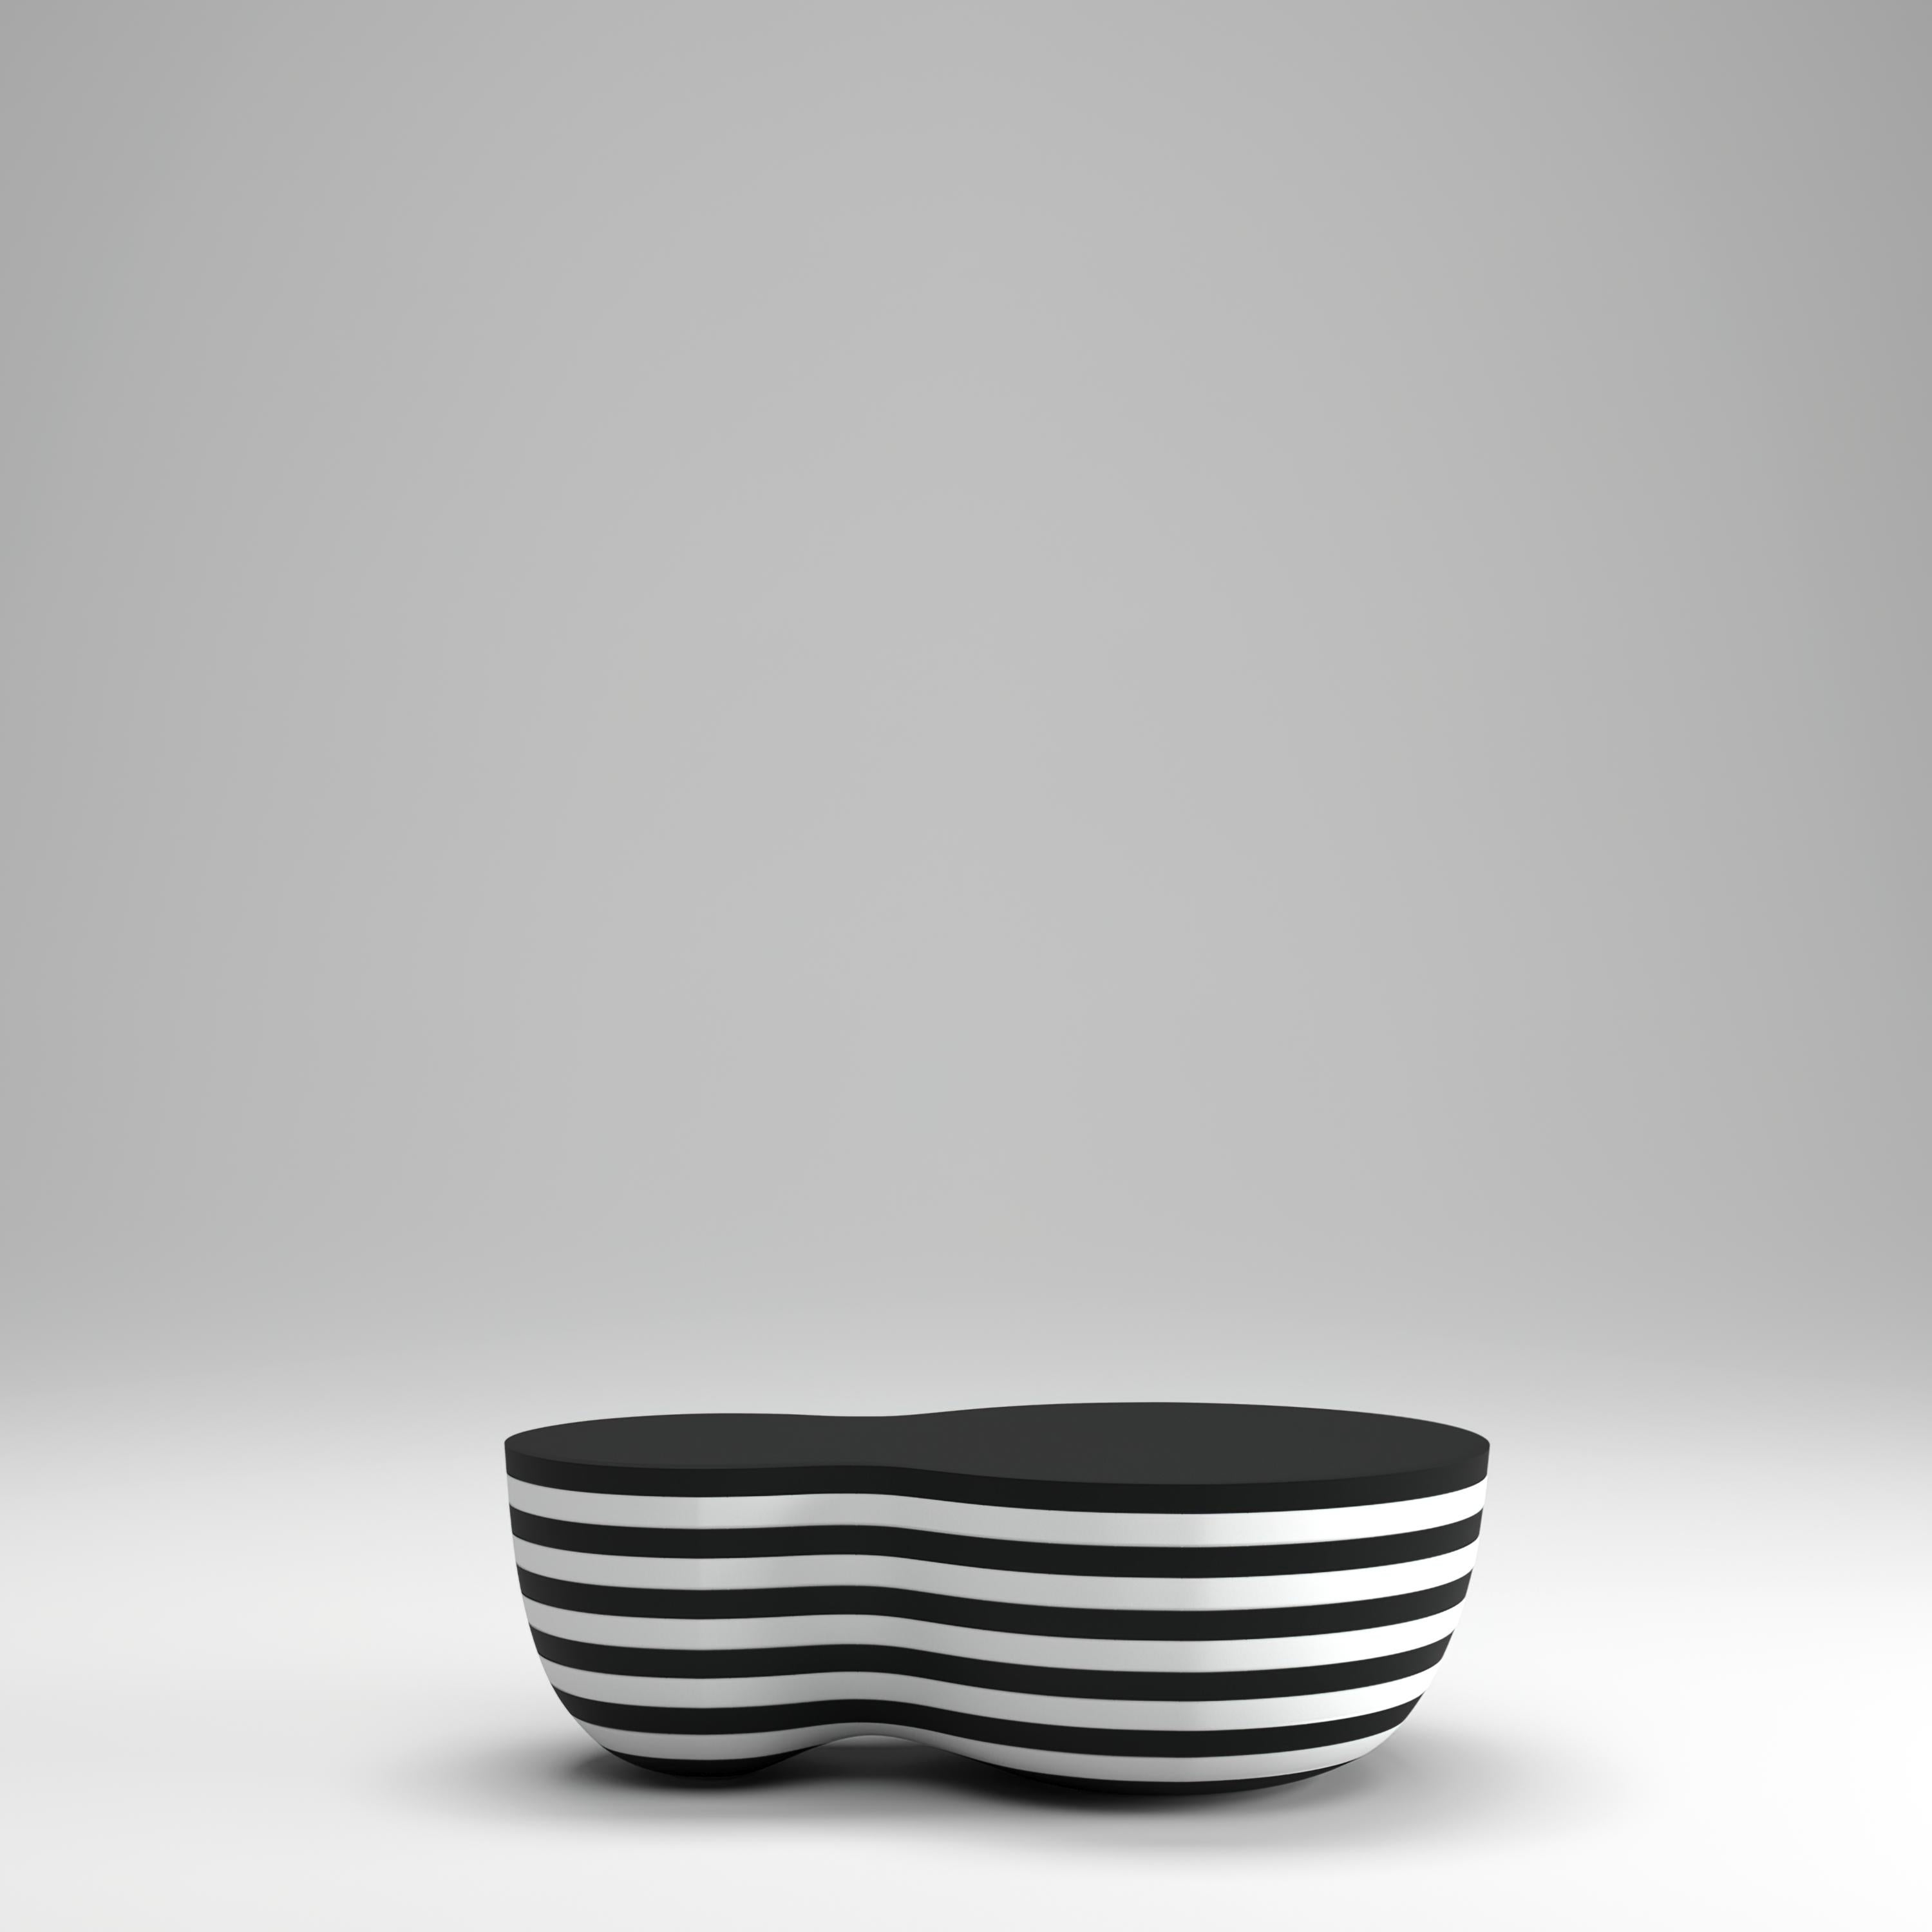 The NUT coffee table was conceived as an experiment in curvilinear forms. Designer Yuriy Zimenko combined the flat rhythm of monochrome MDF layers with a curved shape. The elegant twists of the wood-derived material are achieved with a sophisticated